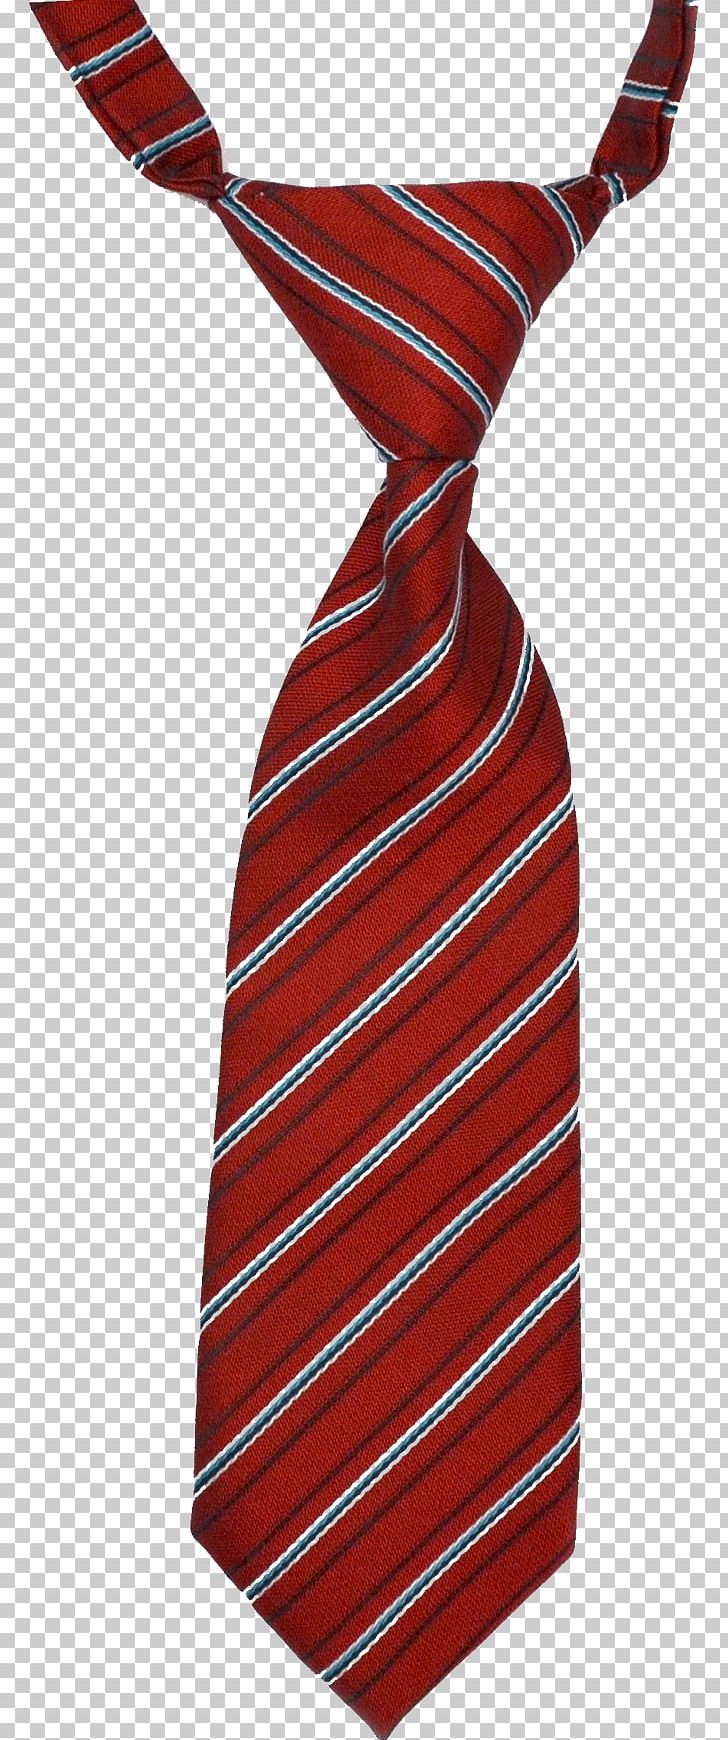 Stripes Tie PNG, Clipart, Clothes, Ties Free PNG Download